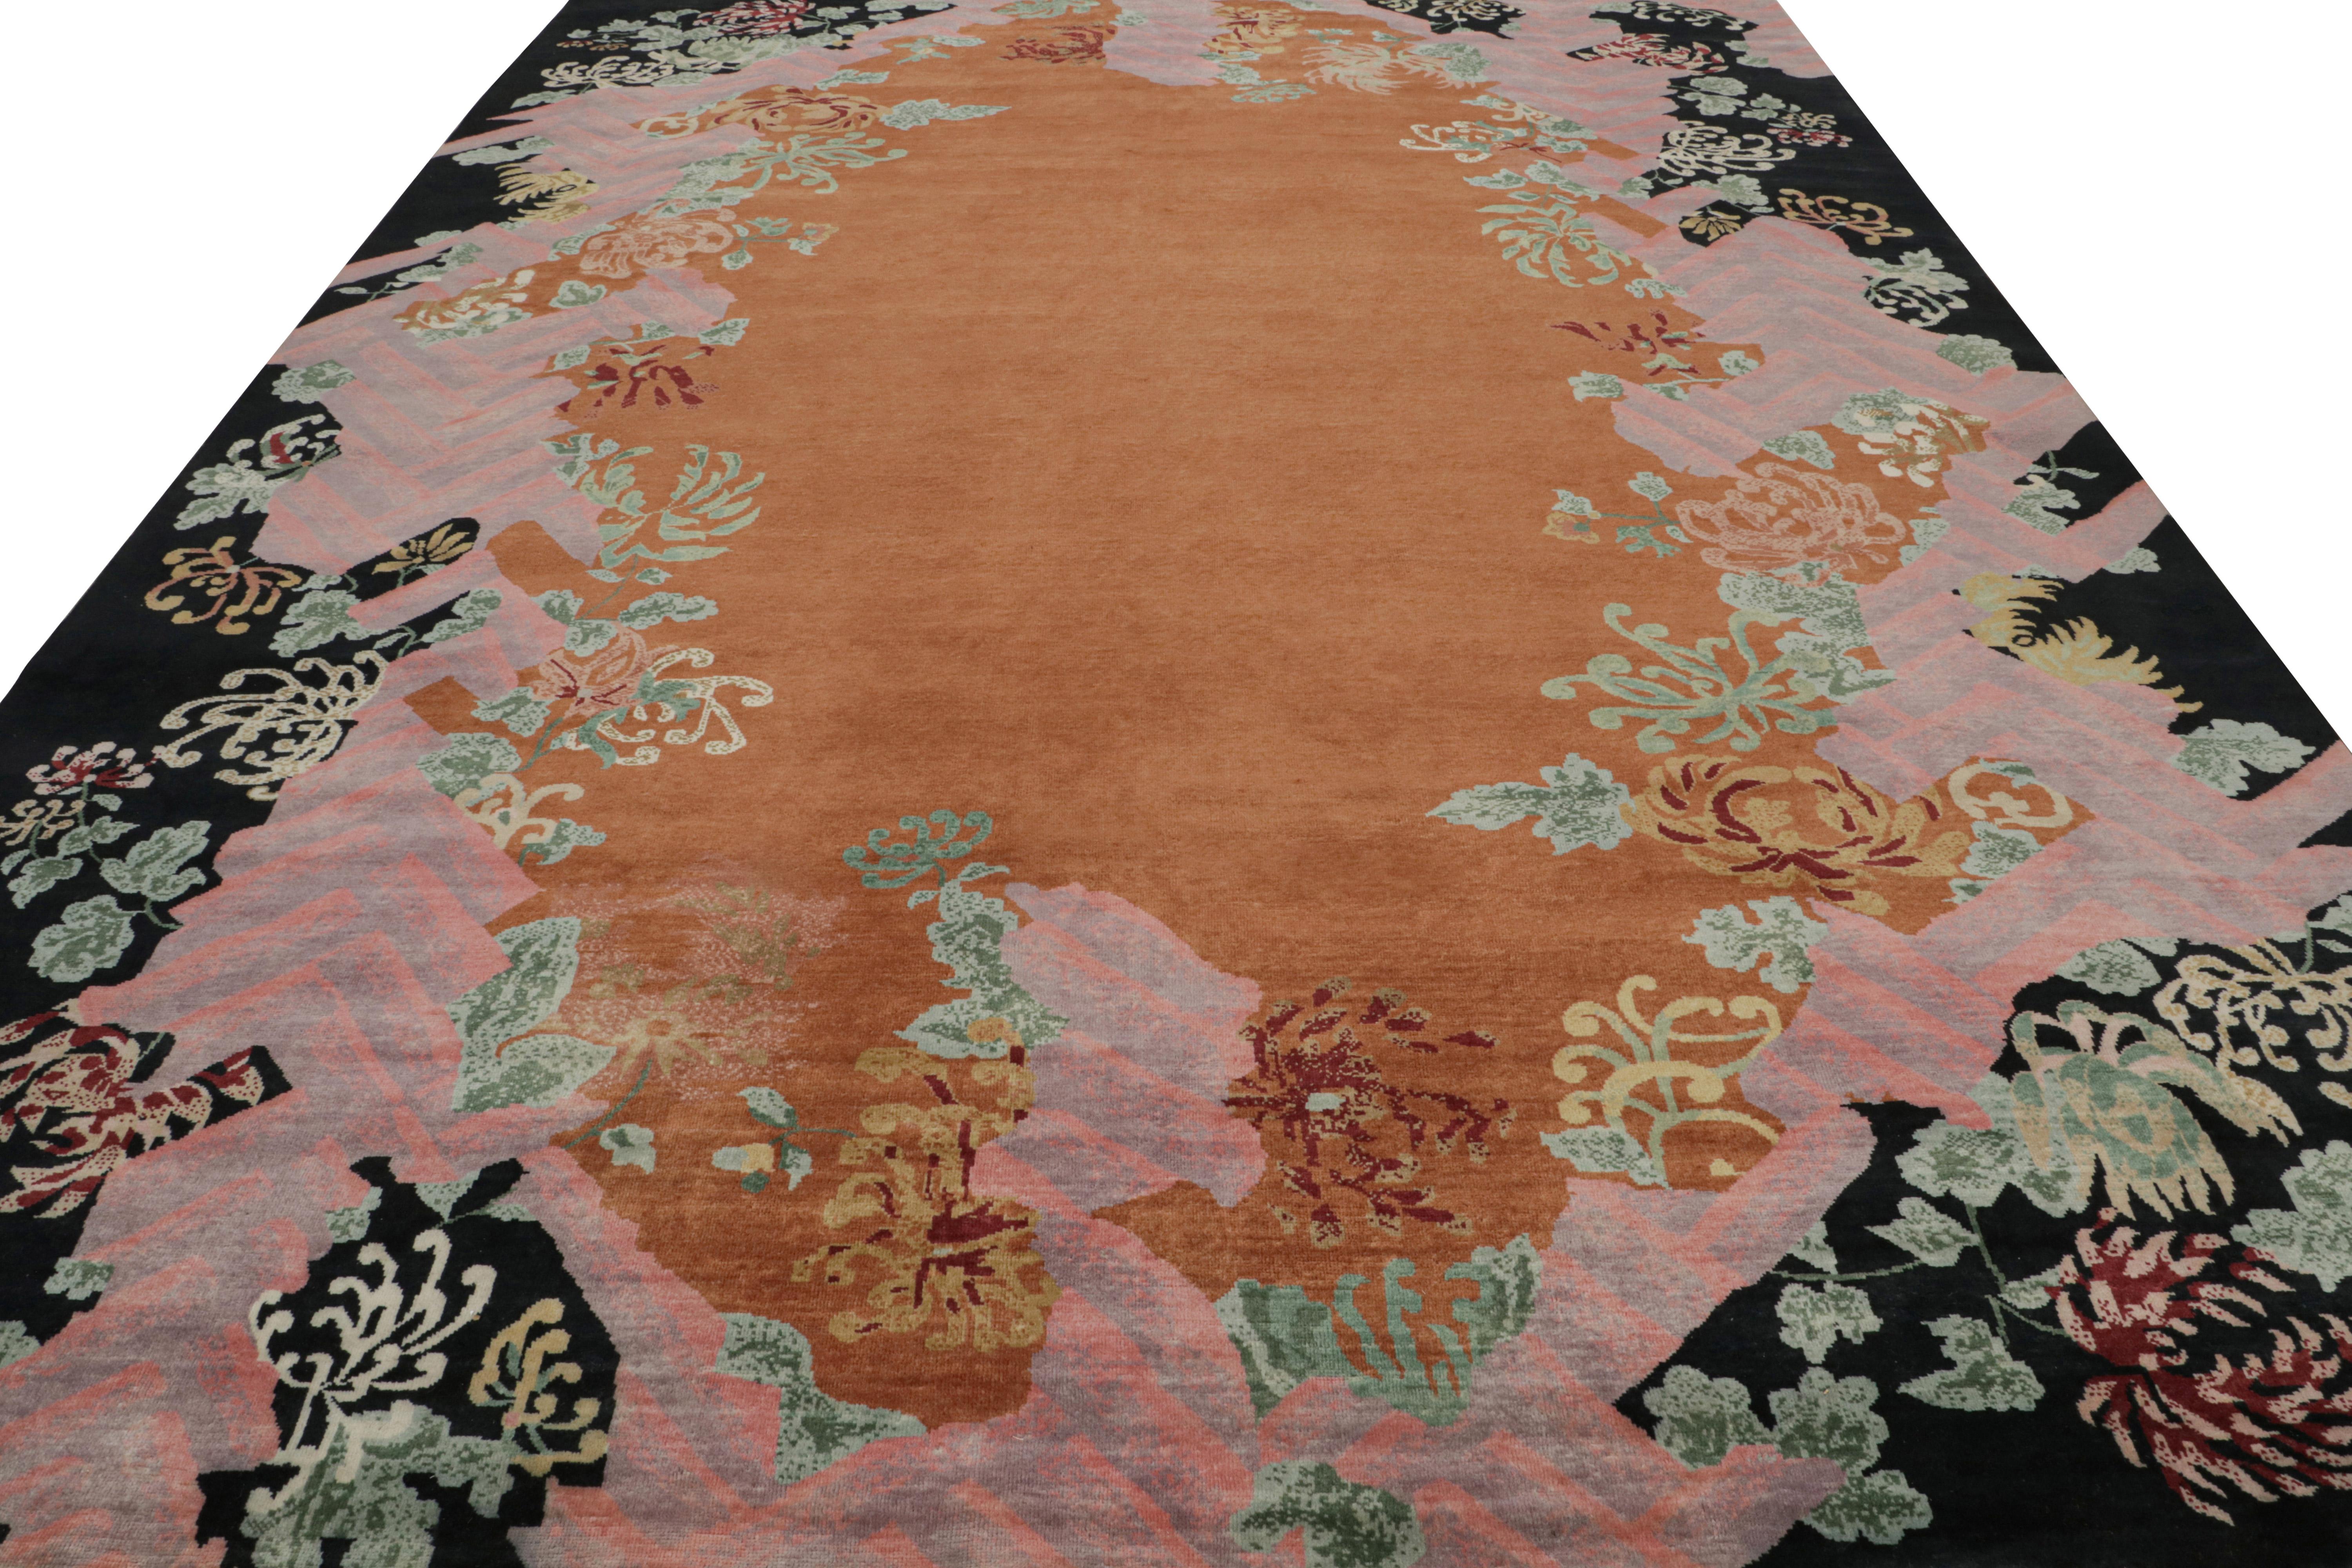 Hand-Knotted Rug & Kilim’s Chinese Art Deco Style Rug in Burnt Orange with Floral Patterns For Sale